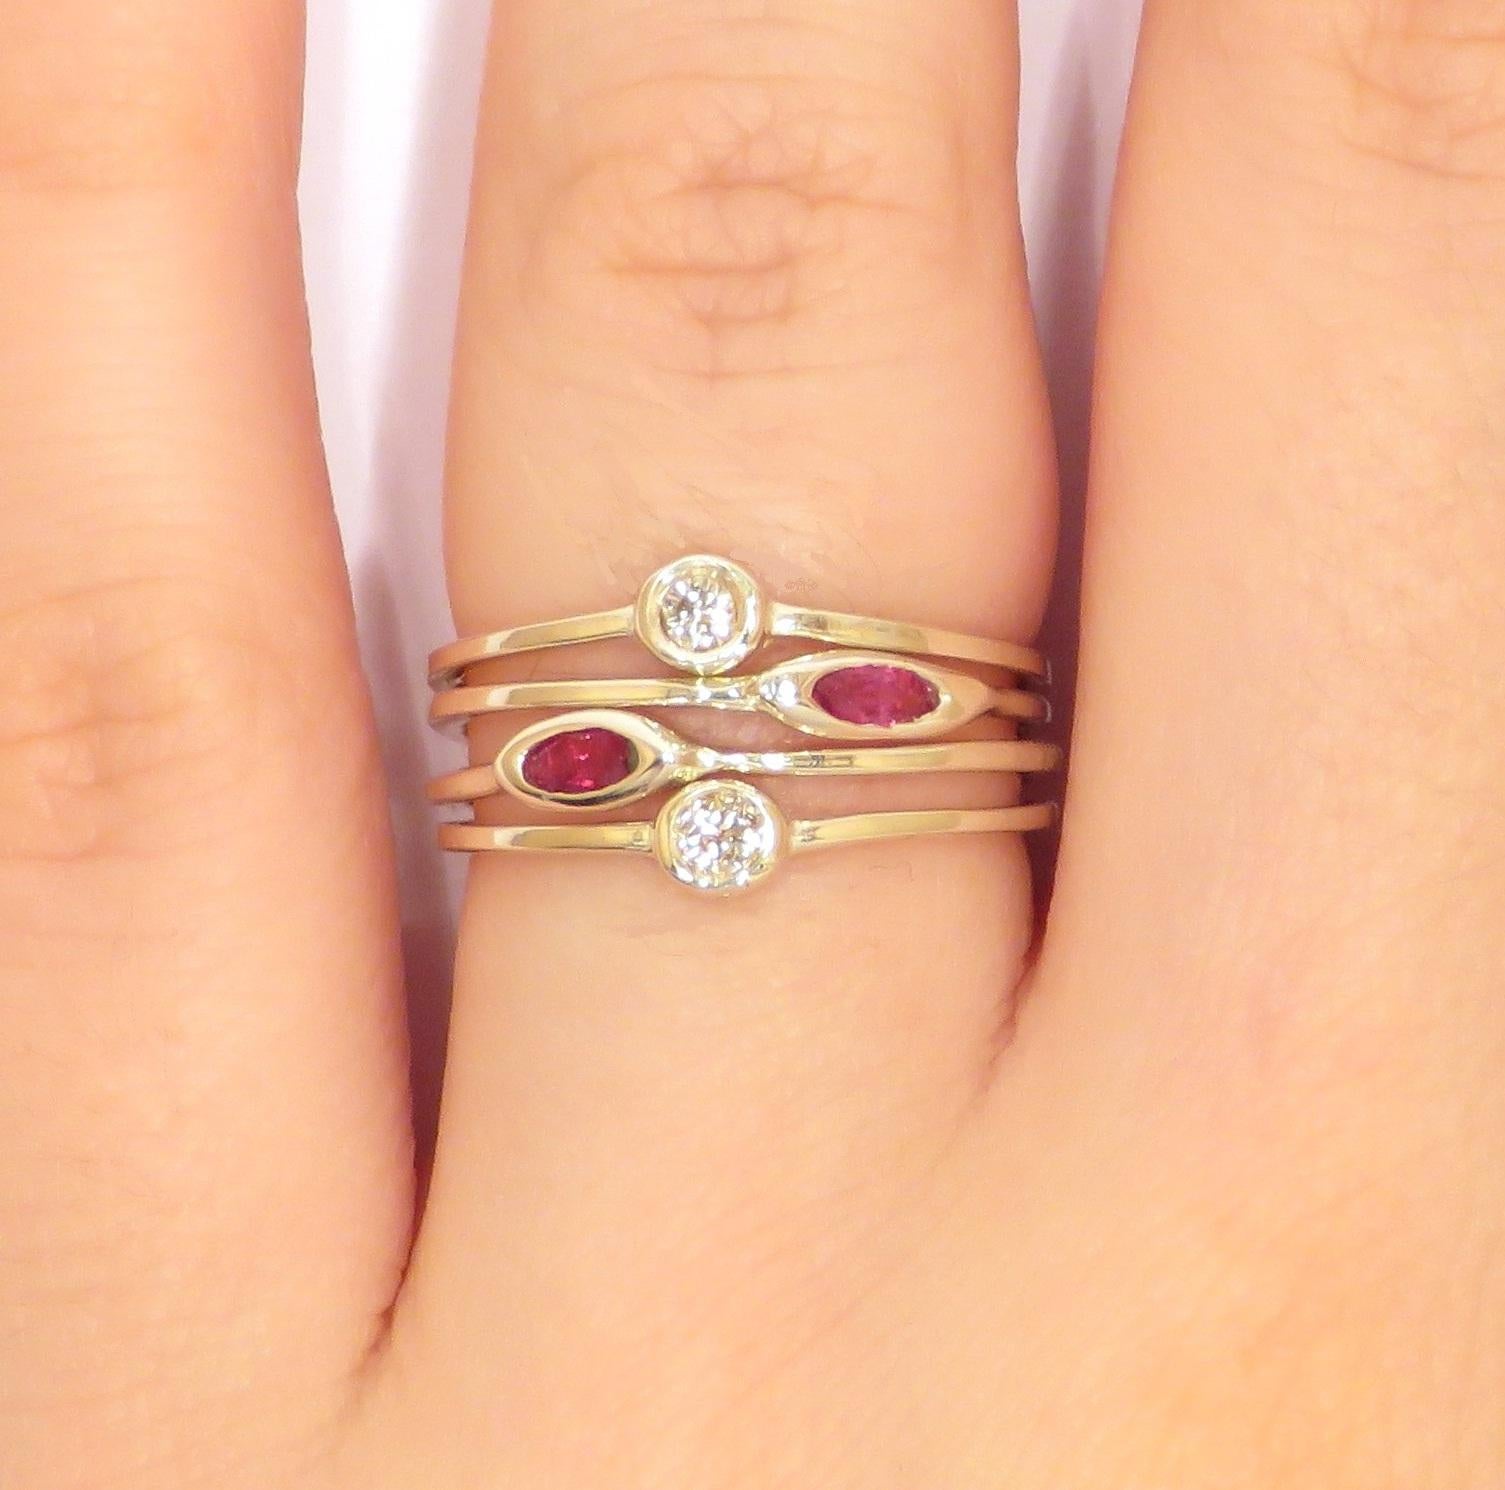 Modern stacking rings in 9 karat white gold with natural navette cut rubies and round cut  white diamonds. The price of this item is for four stacking rings and it is composed by four rings with 2 diamonds round cut and 2 rubies navette cut.
US